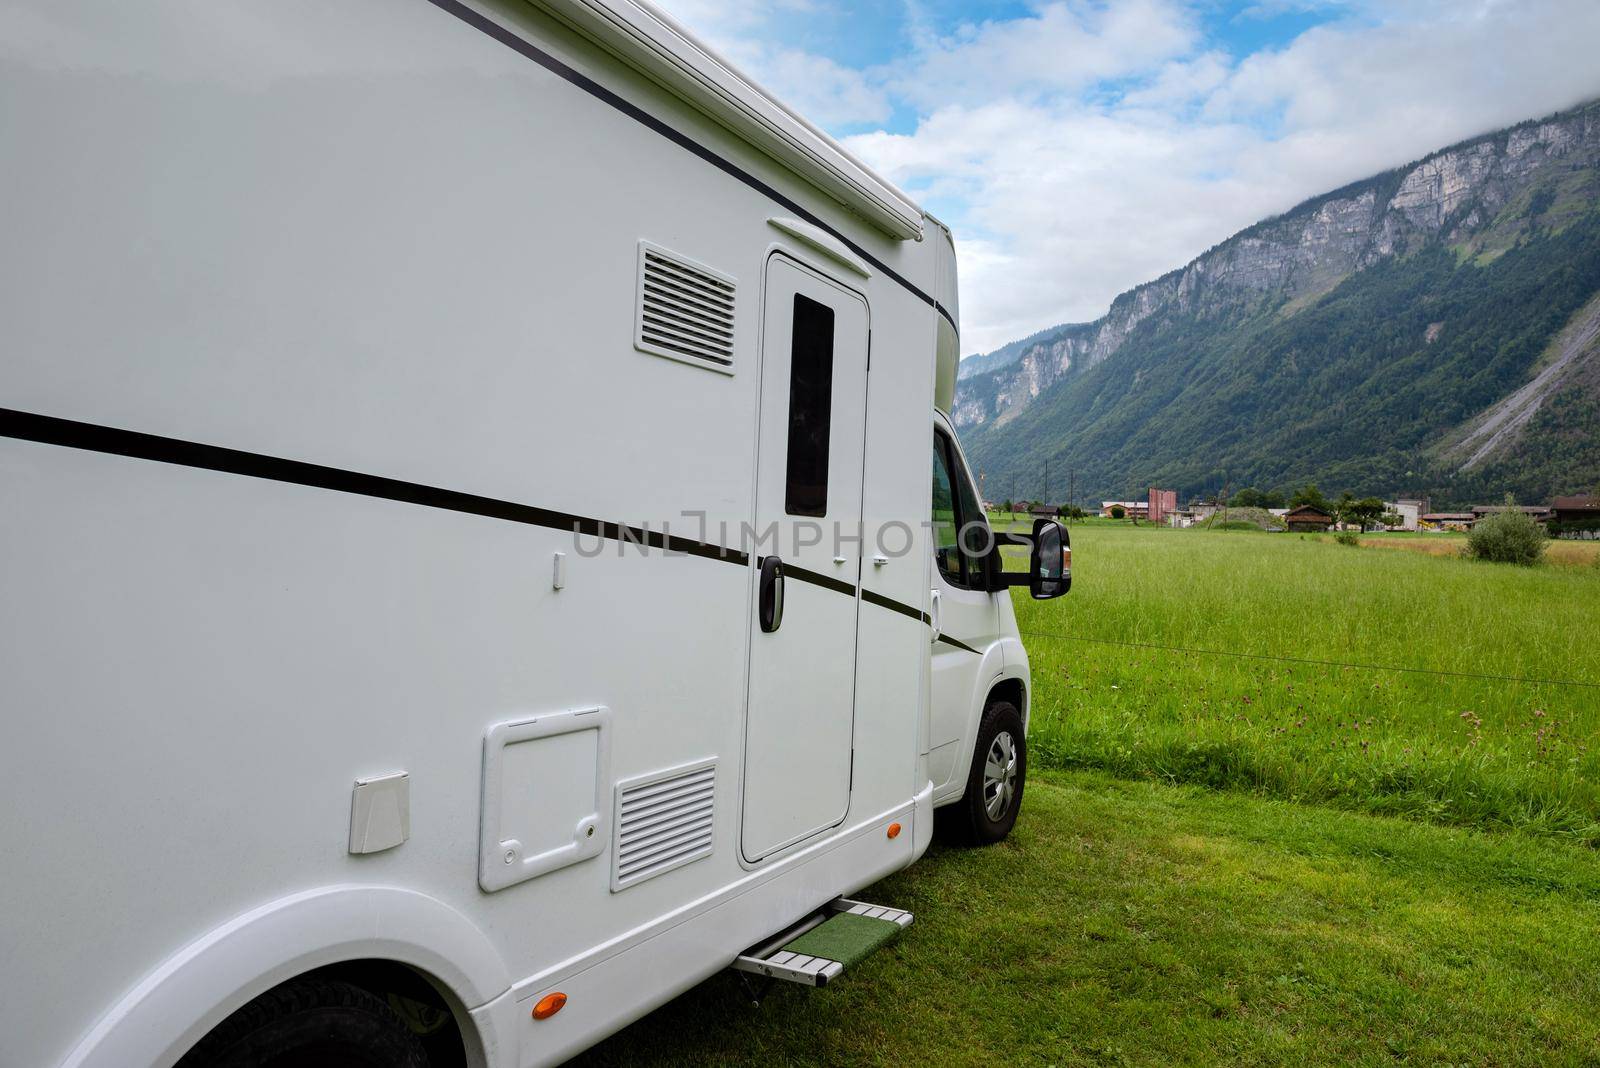 Caravan car vacation. Family vacation travel RV. Holiday trip in motorhome. Switzerland natural landscape.